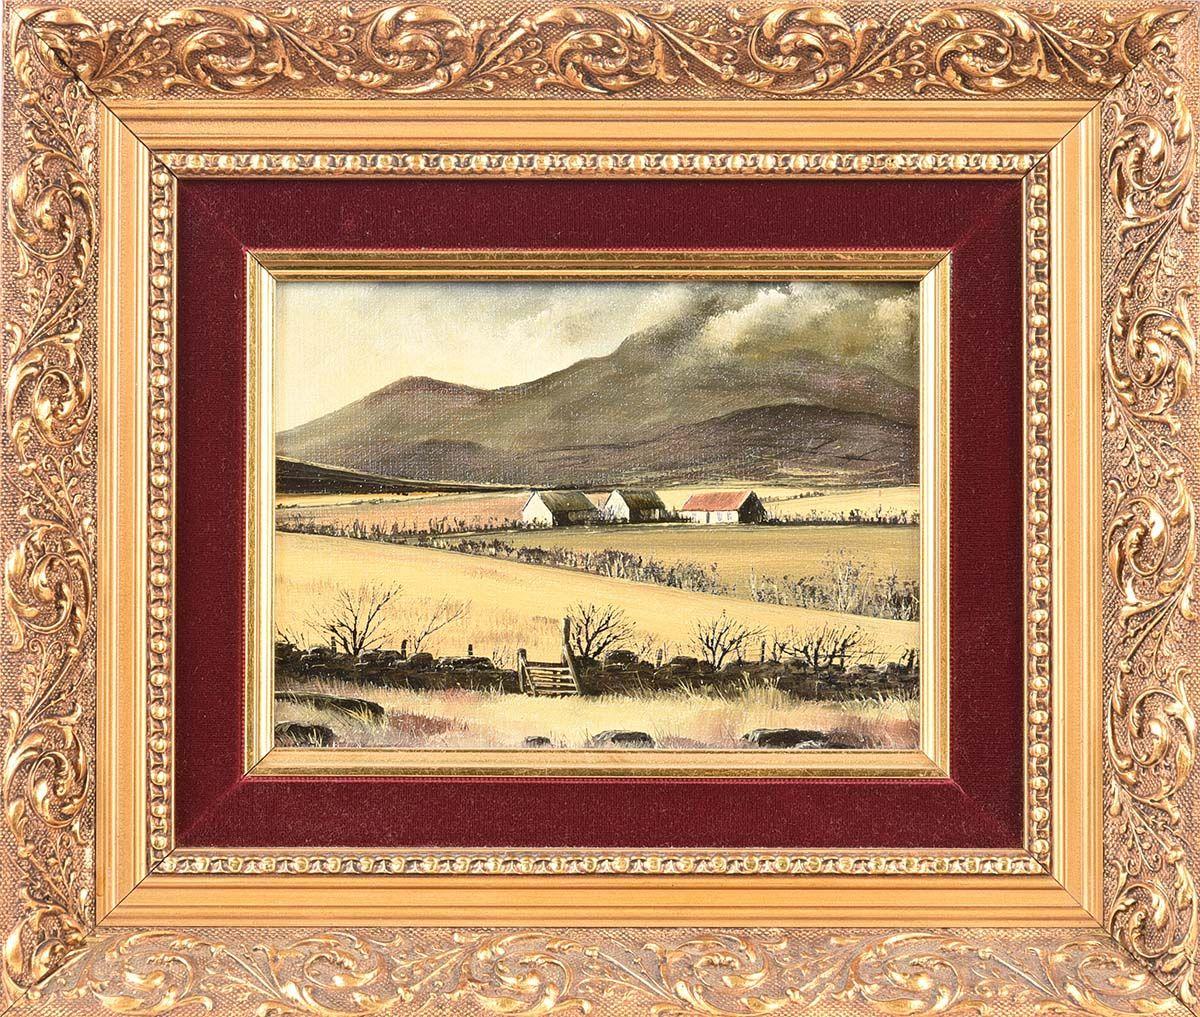 Small Oil Painting of Cottages in the Mournes in Ireland by Contemporary Artist, Derek Quann 

Art measures 8 x 6 inches 
Frame measures 13 x 11 inches (ornate gold frame with burgundy velvet insert, condition commensurate with age)